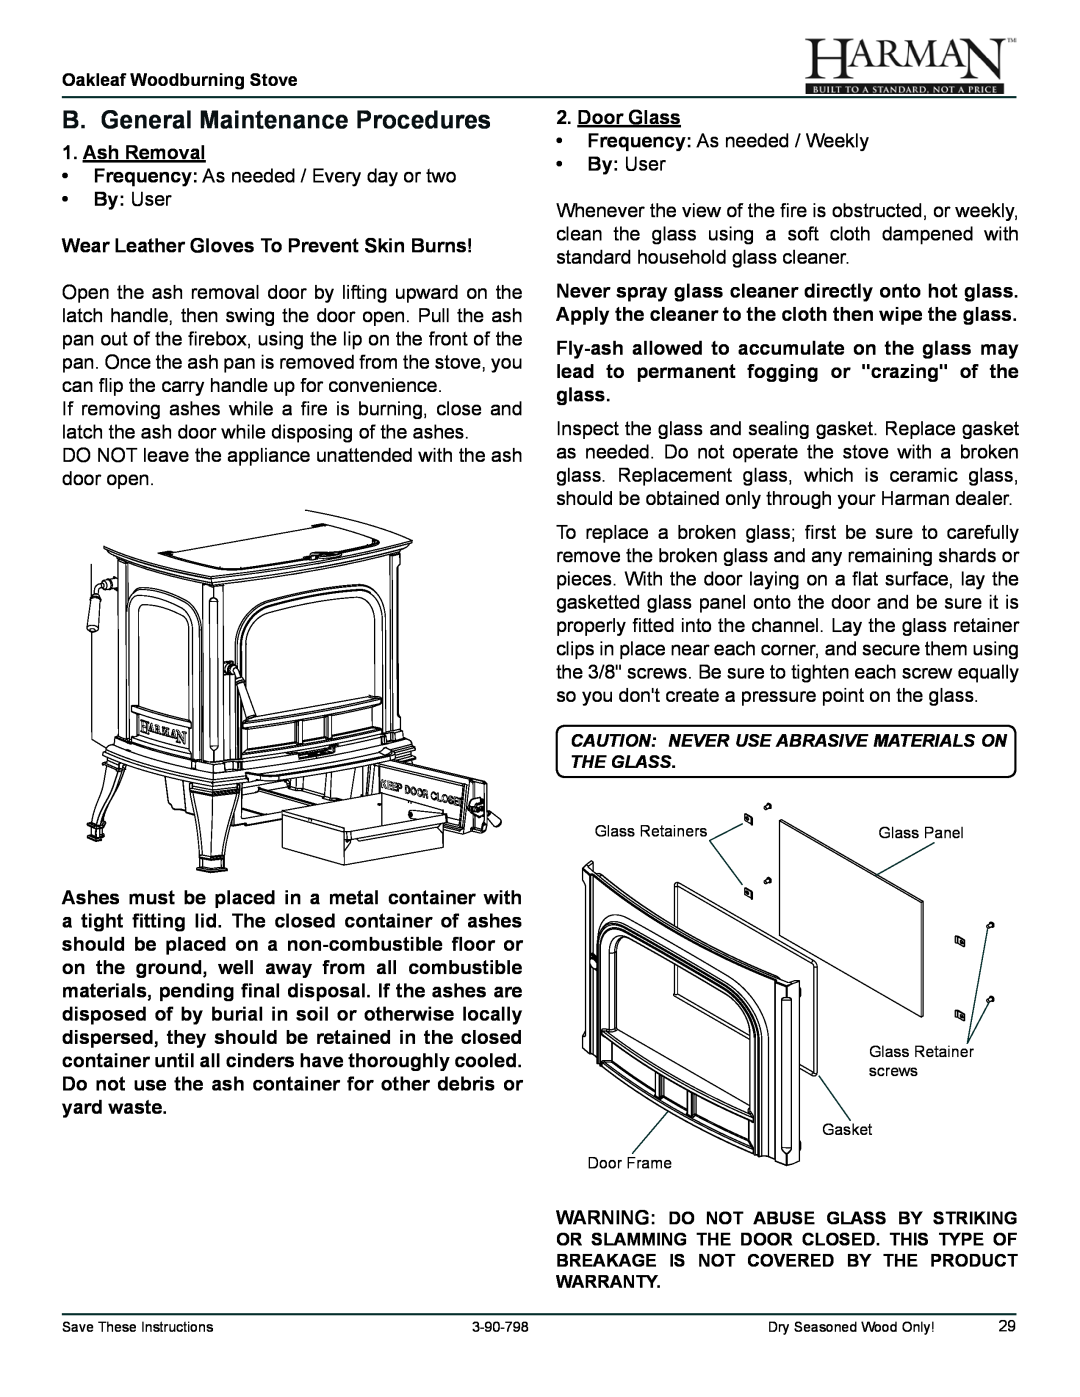 Harman Stove Company 1-90-79700 owner manual B. General Maintenance Procedures, Ash Removal, By User, Door Glass 